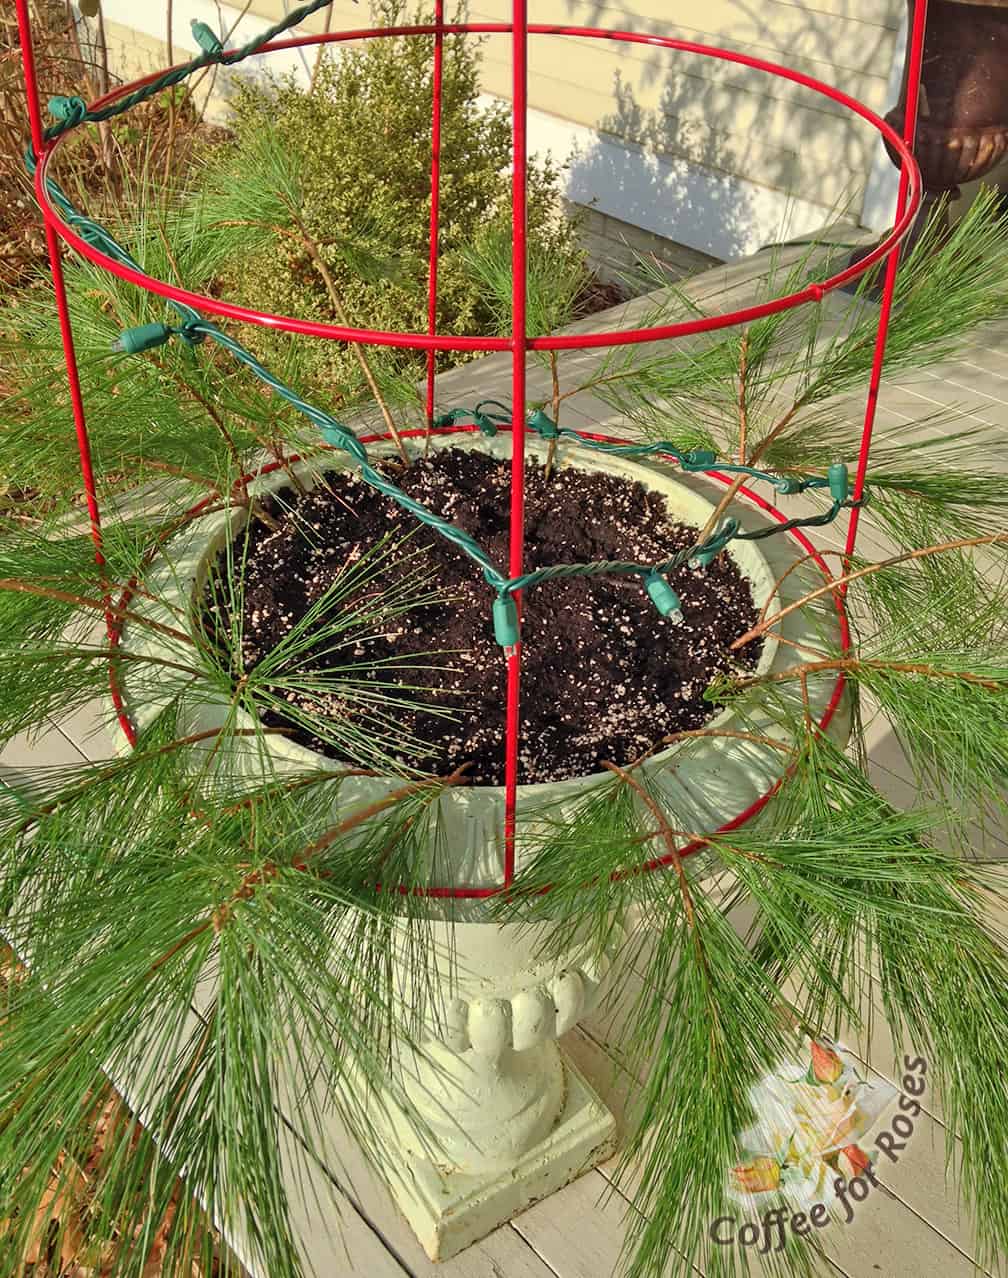 Place the tomato cage on top of the urn. I wired it down under the rim of the urn but frankly, the greens stuck into the soil will hold this in place. Wind the lights in a spiral up the basket.